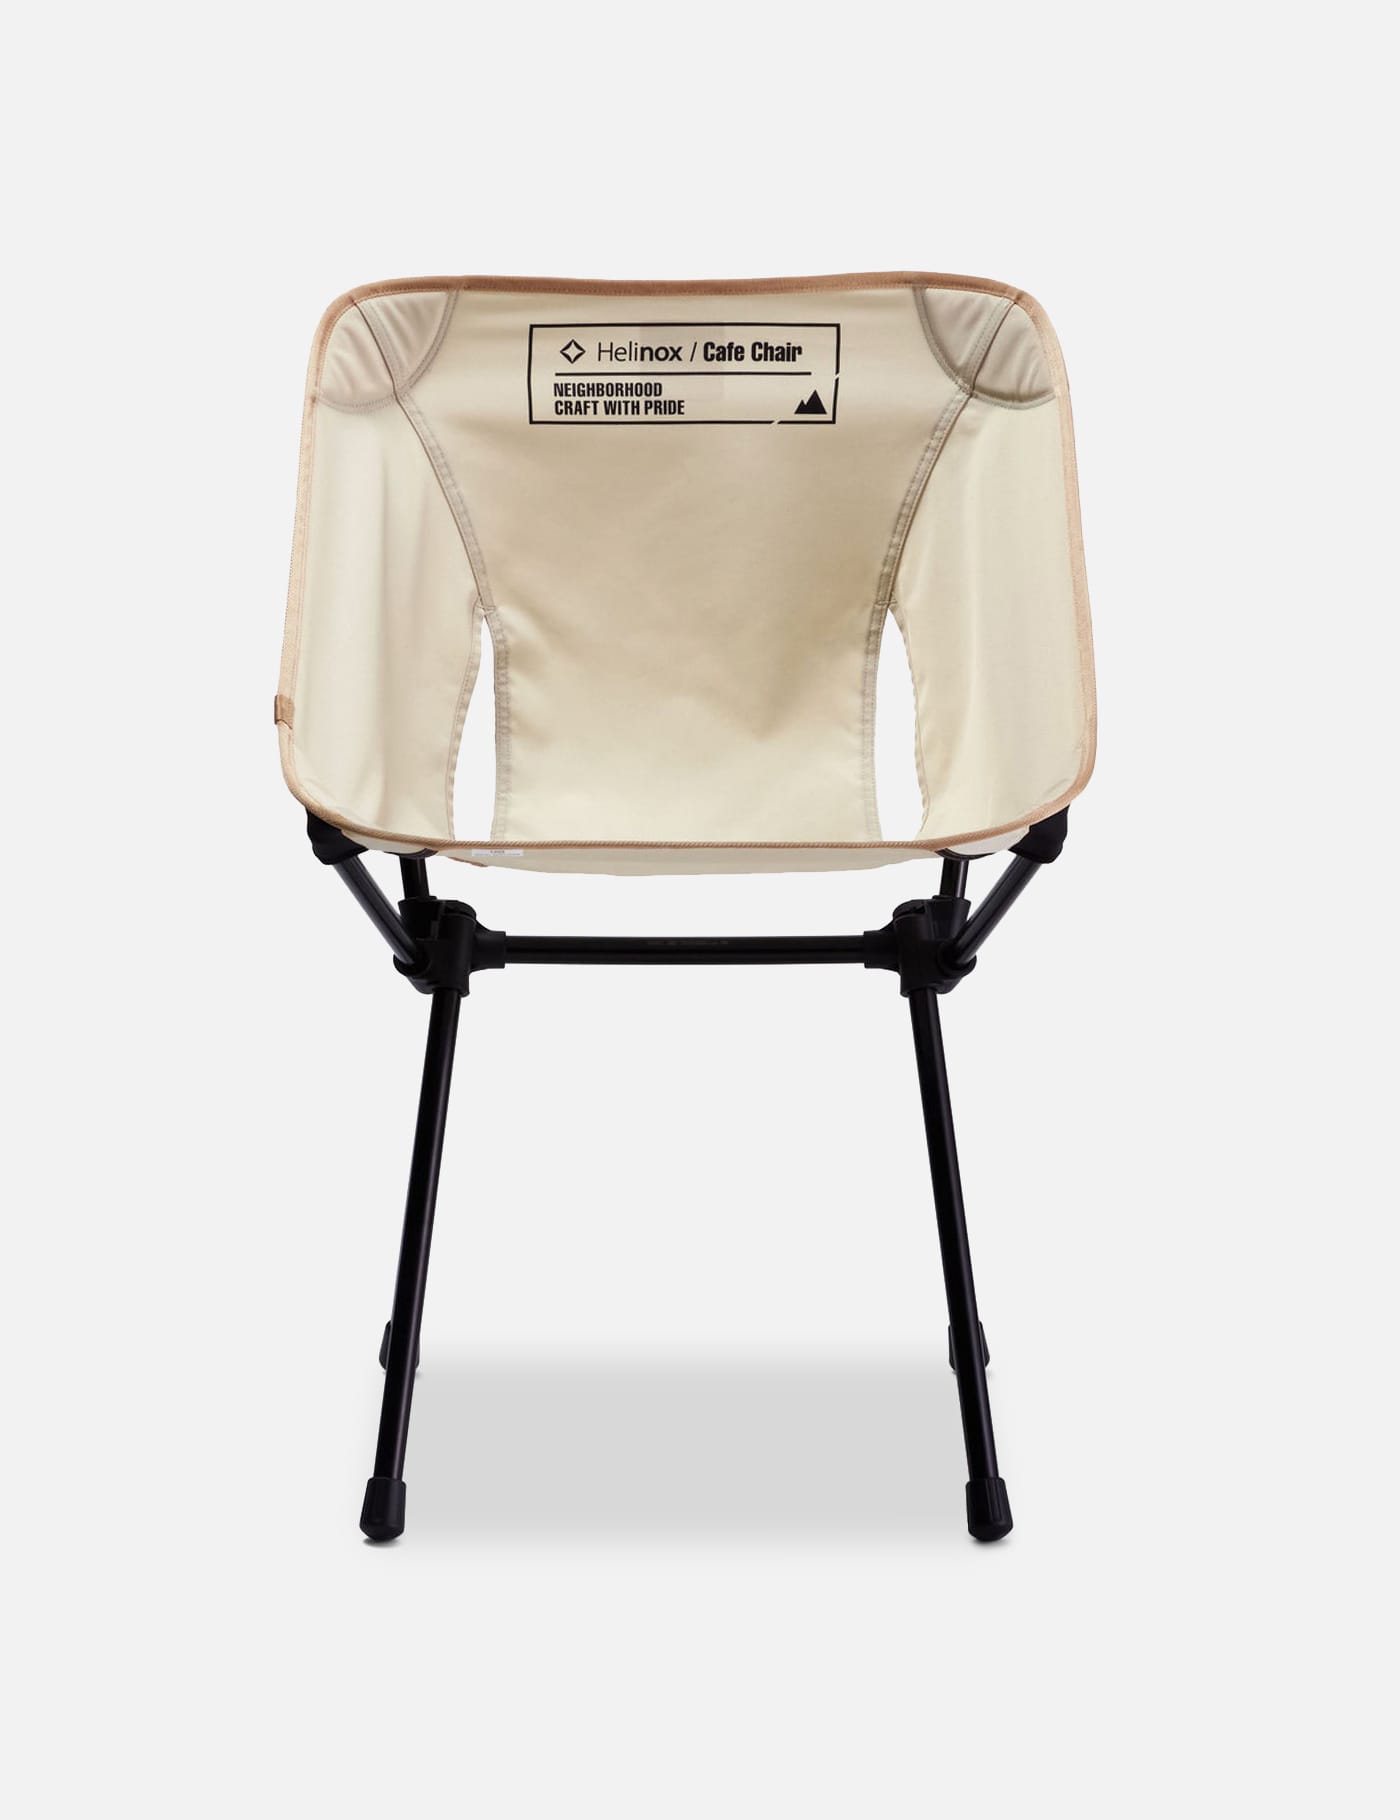 NEIGHBORHOOD - Cafe Chair | HBX - Globally Curated Fashion and